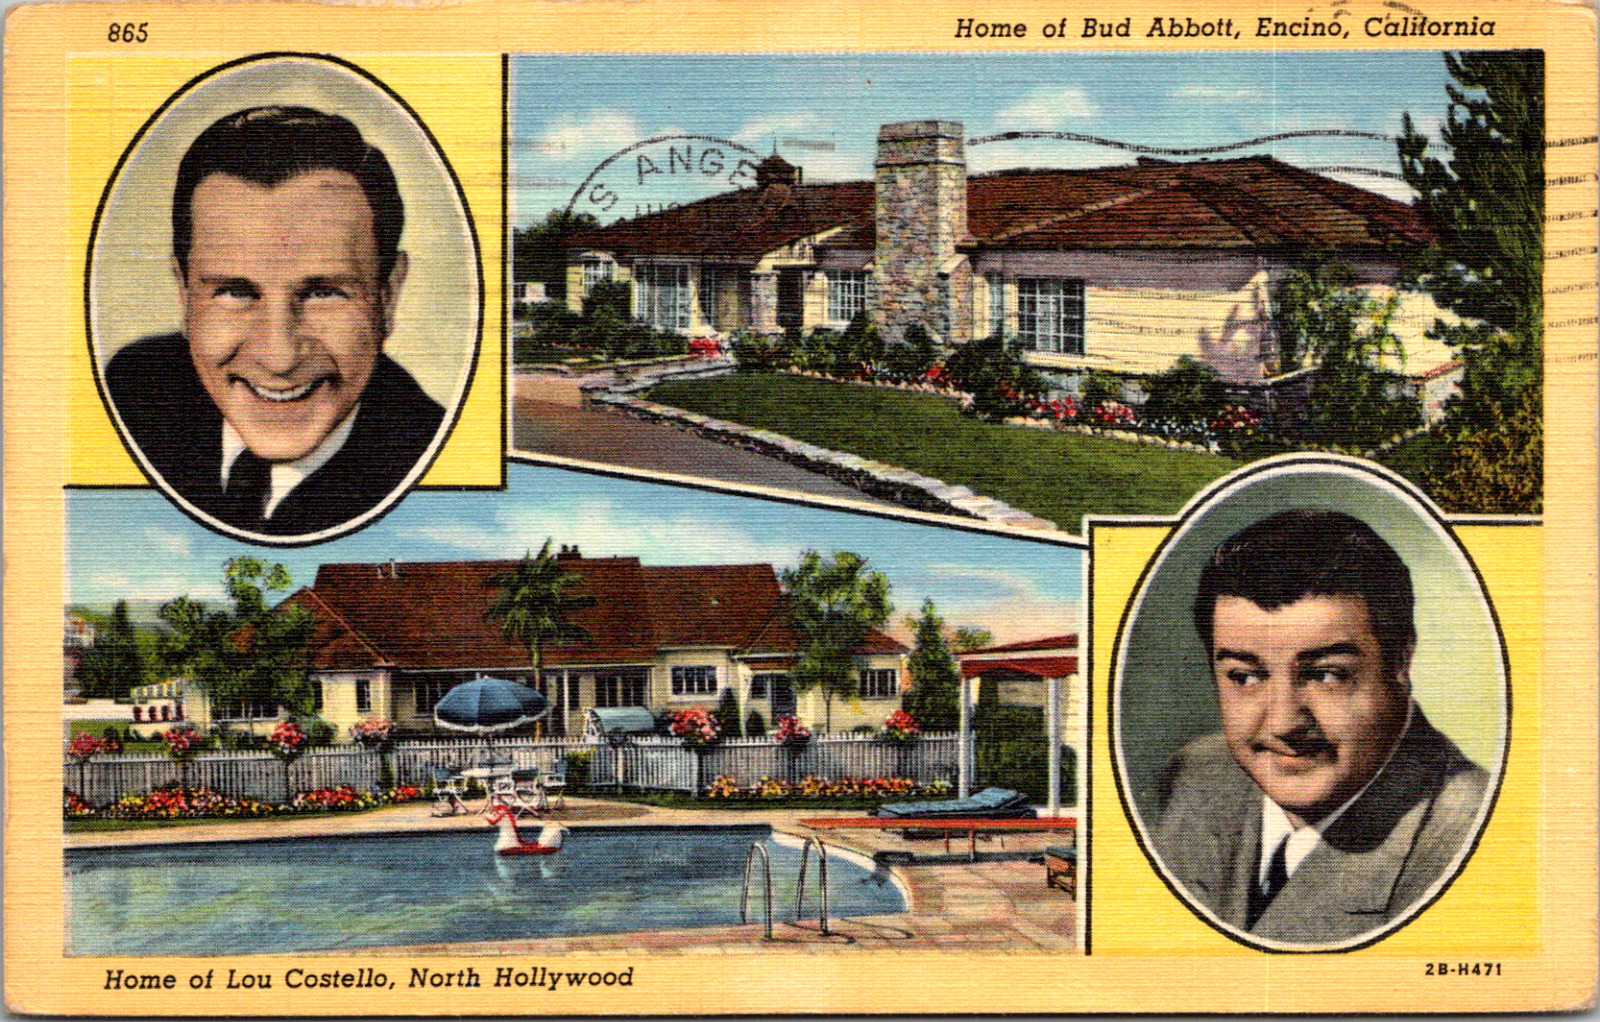 Encino, Hollywood California CA Home of Bud Abbot Lou Costello Vintage Postcard